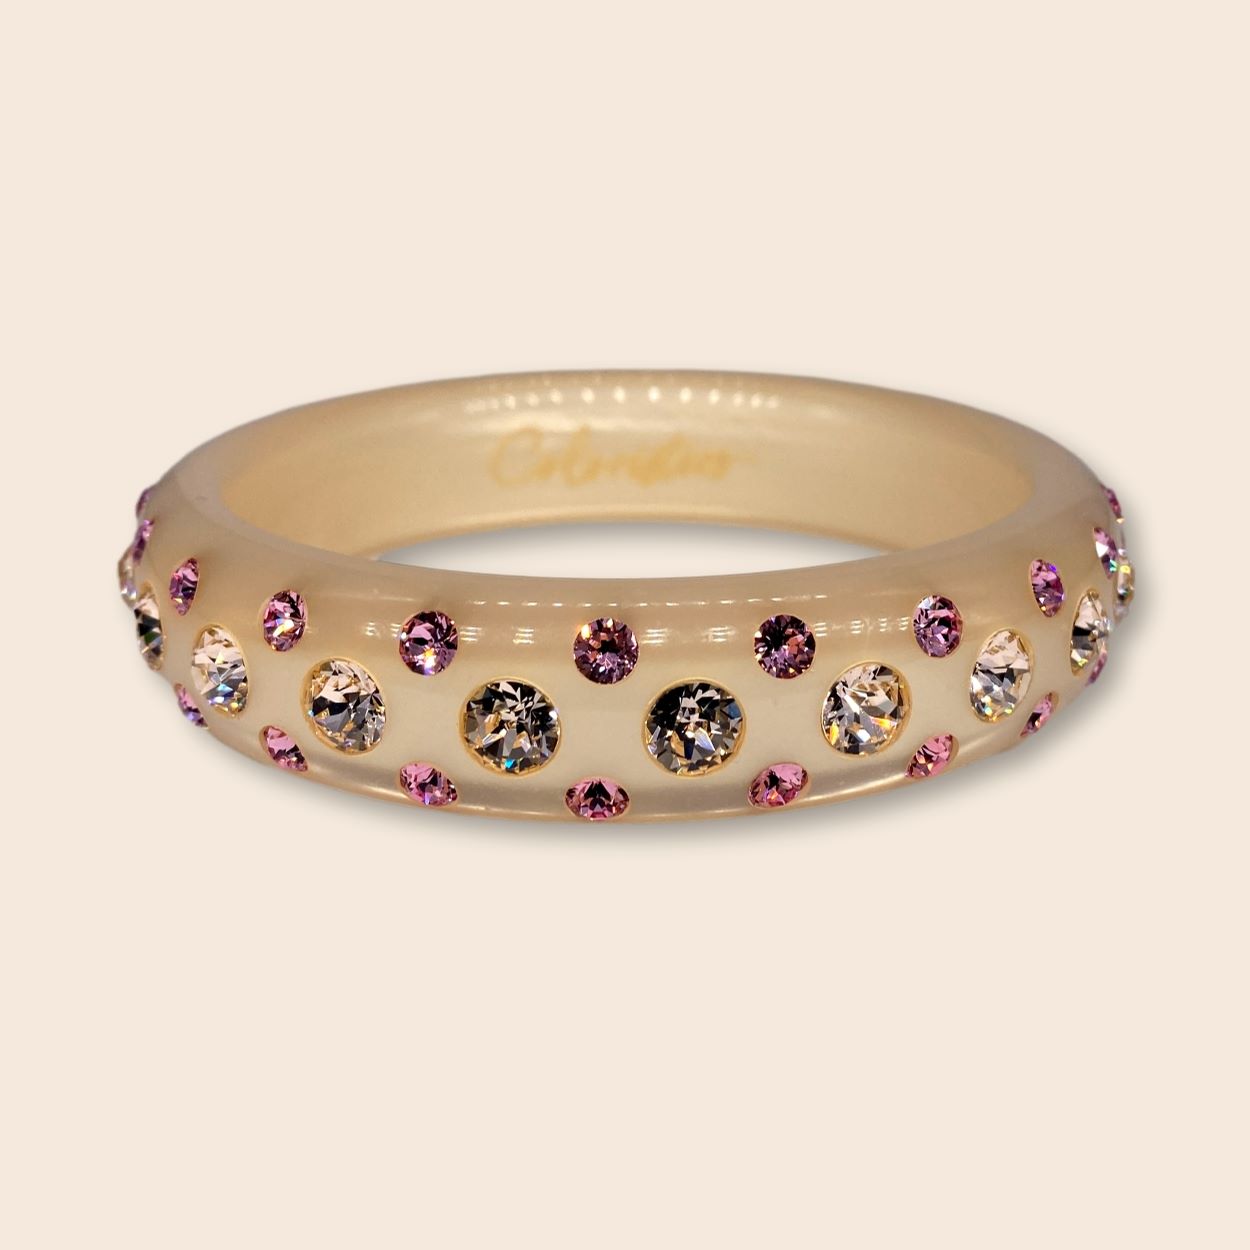 Coloristers Armreifen in champagner mit Kristallen. Coloristers Bangle with crystals in champagne.